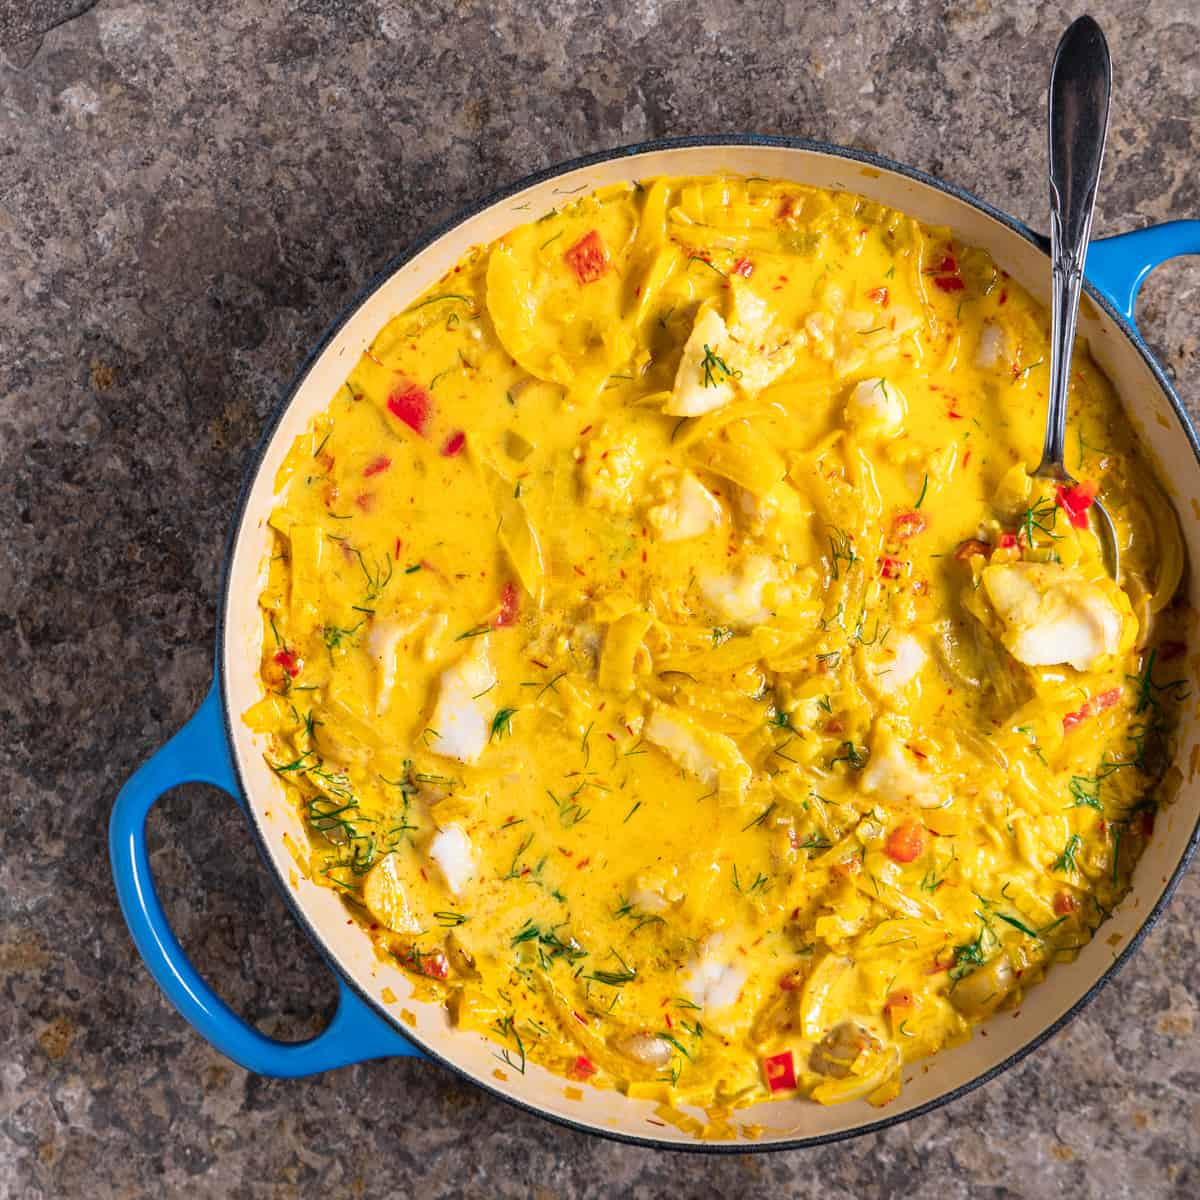 Full, blue casserole dish of fish stew with fennel and saffron